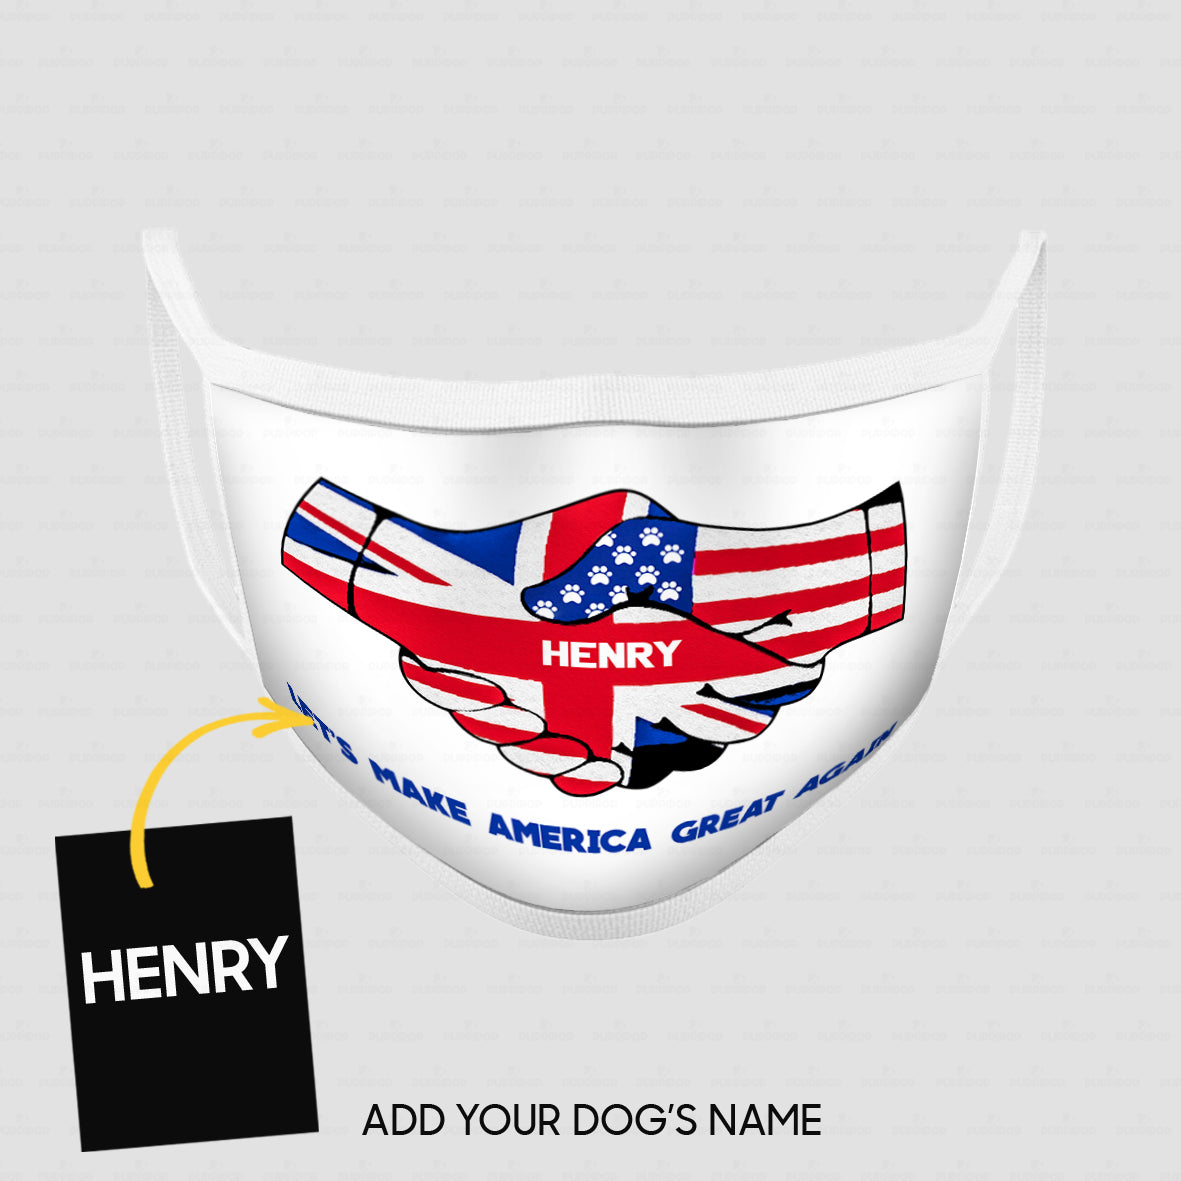 Personalized Dog Gift Idea - Shake Hand And Make America Great Again For Dog Lovers - Cloth Mask